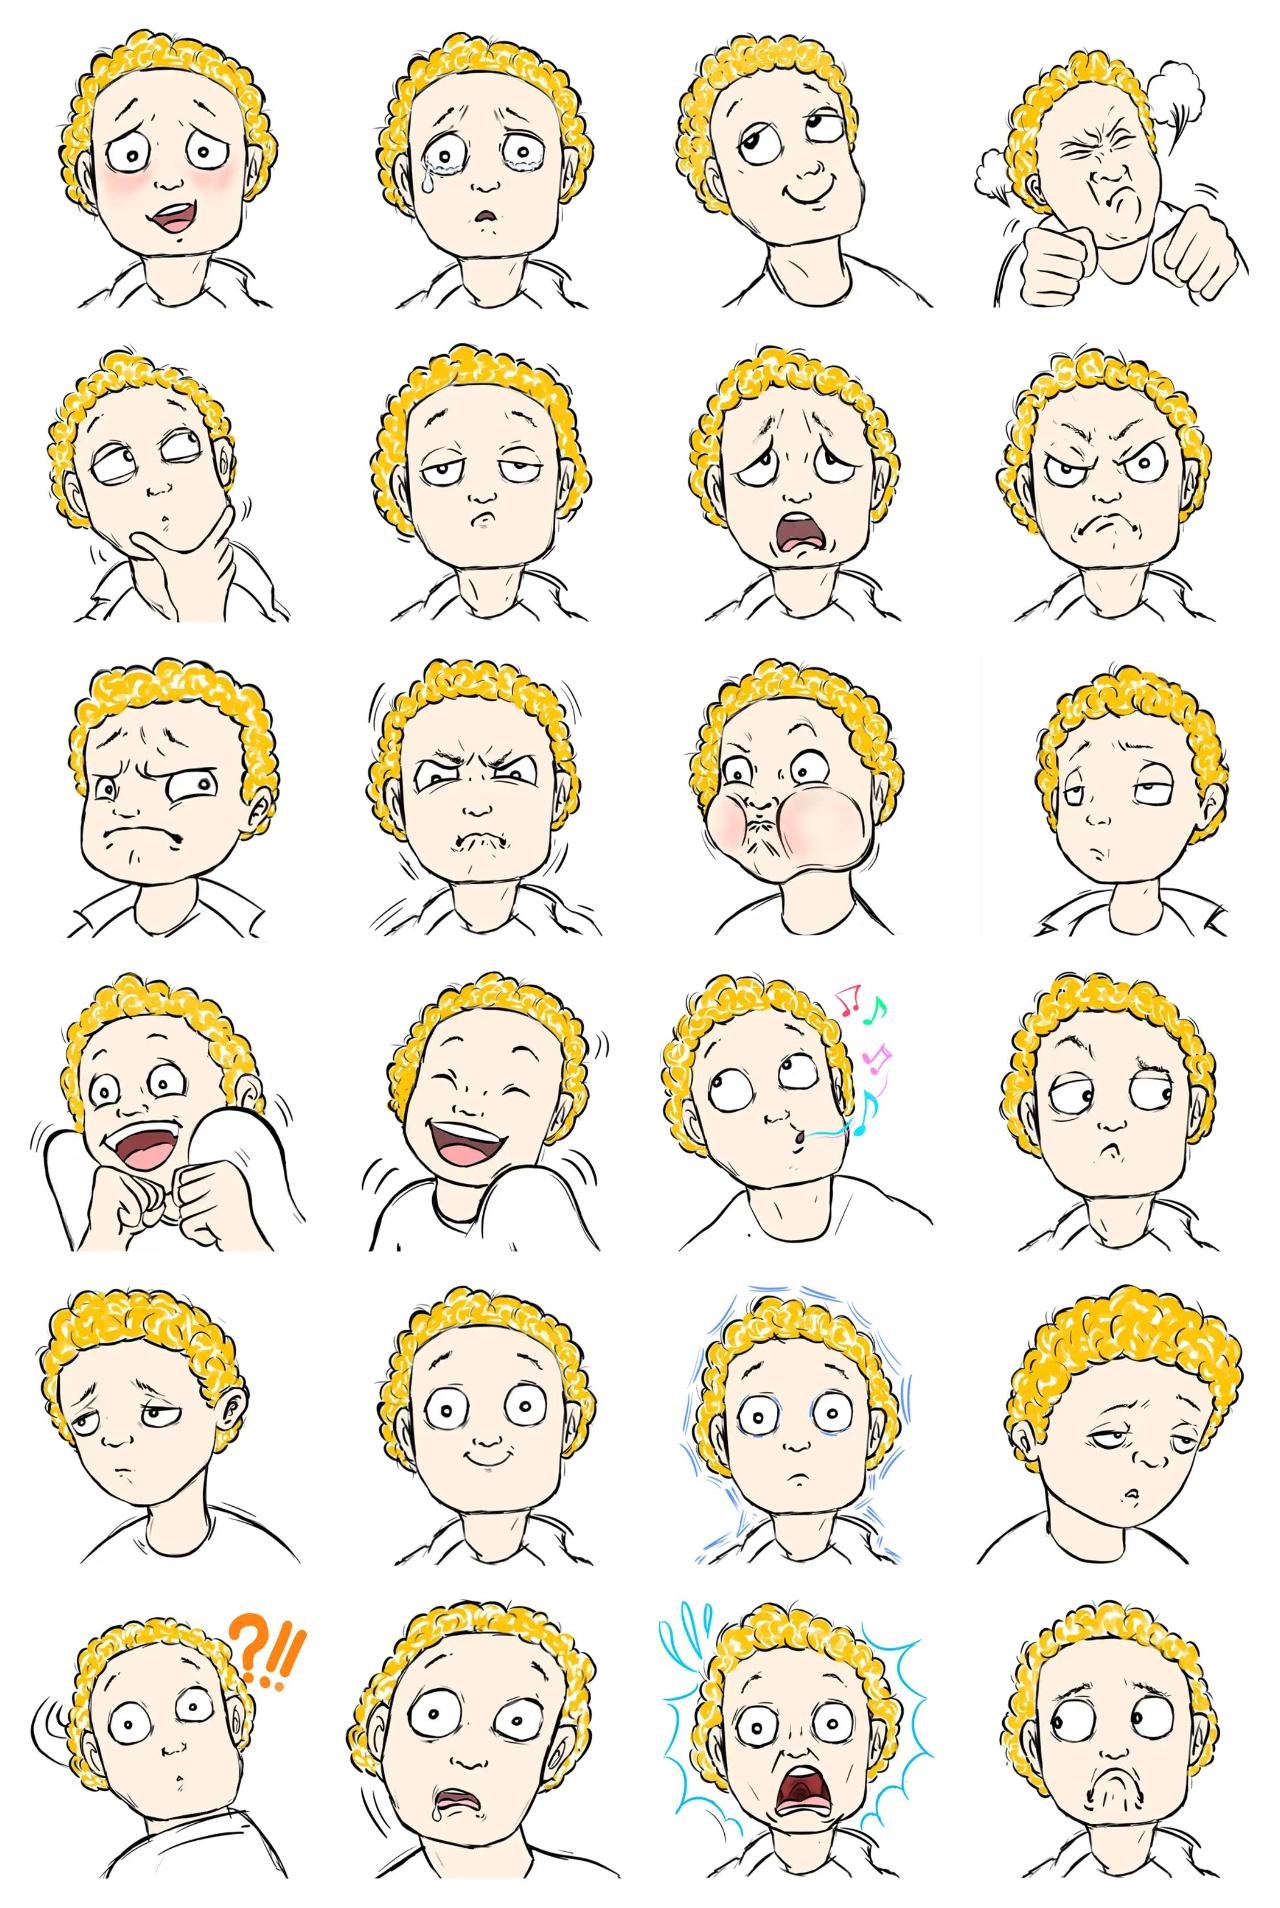 Cool guy Jyan People sticker pack for Whatsapp, Telegram, Signal, and others chatting and message apps